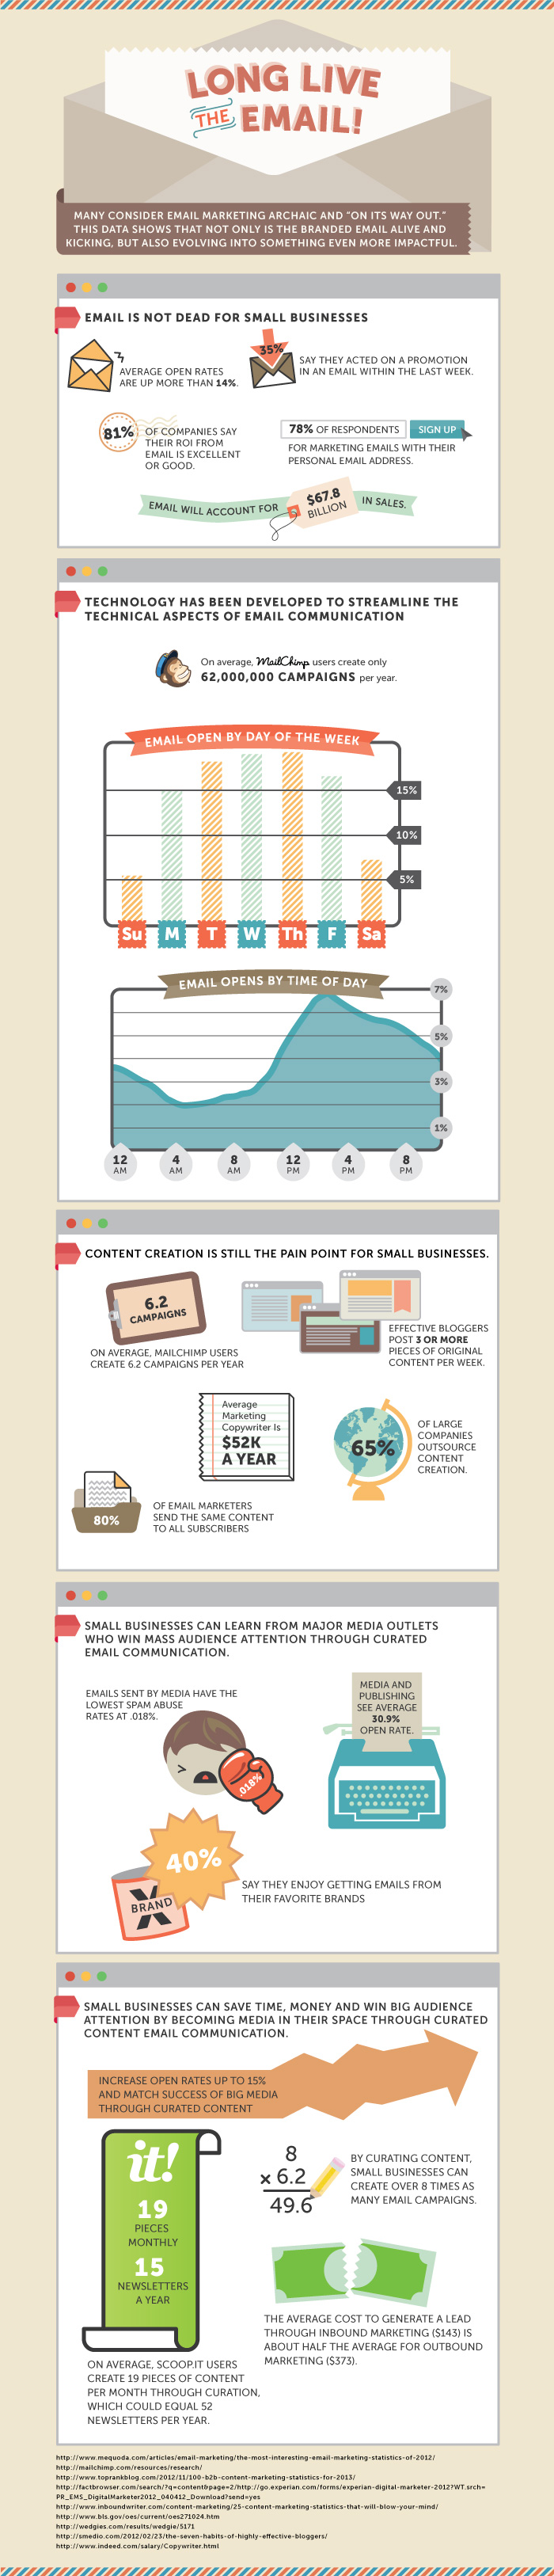 email-is-still-alive-infographic